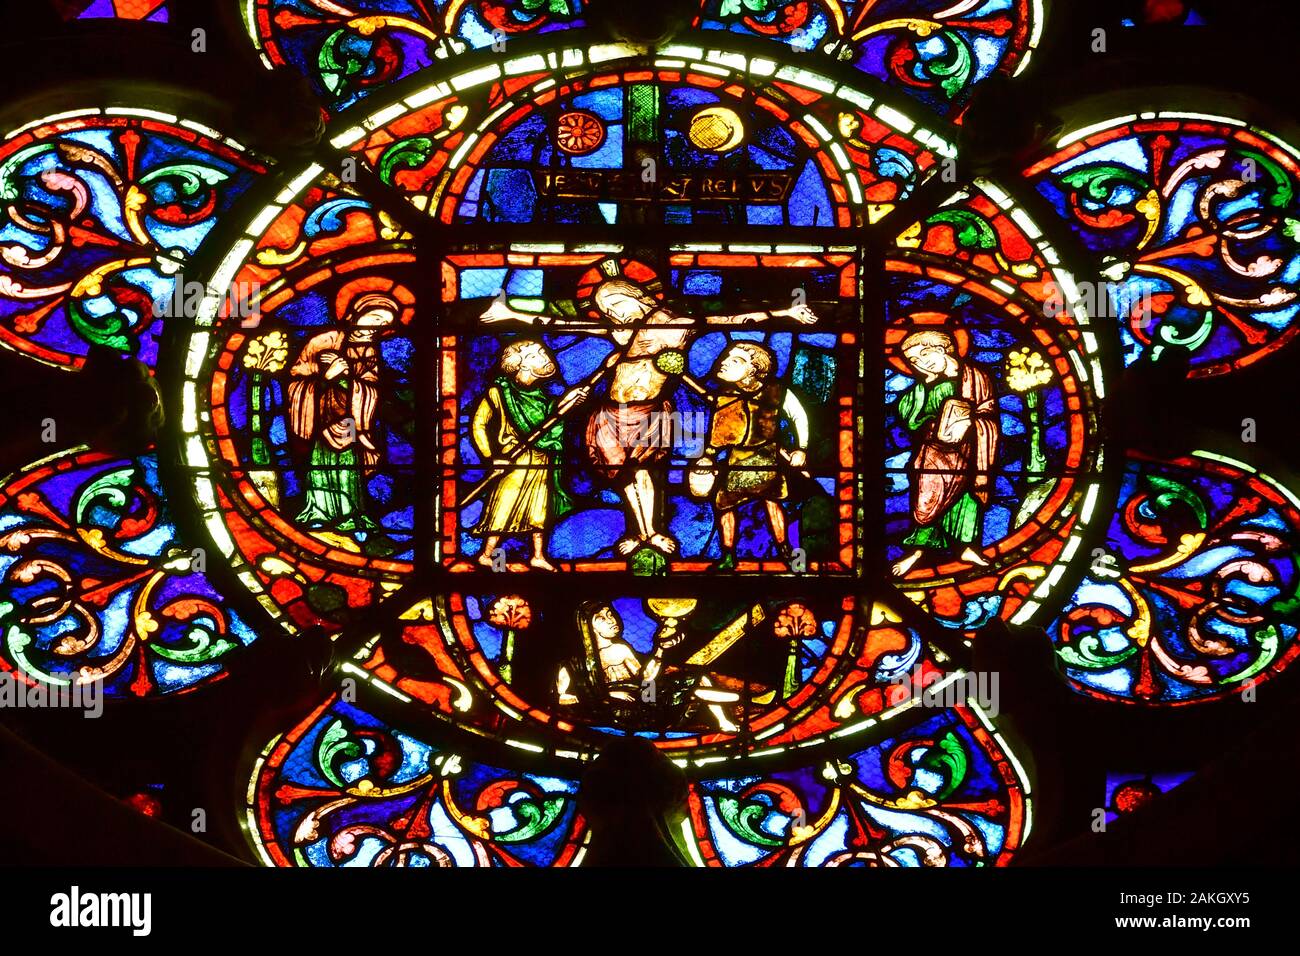 France, Oise, Beauvais, Saint-Pierre de Beauvais cathedral built between the 13th and 16th century has the highest choir in the world (48,5 m), Our Lady (Notre-Dame) or Virgin Chapel, Stained glass from the 13th century, Rose of the Crucifixion, in the center Jesus on the cross is surrounded by 2 soldiers, on both sides Mary, his mother and a disciple, John Stock Photo